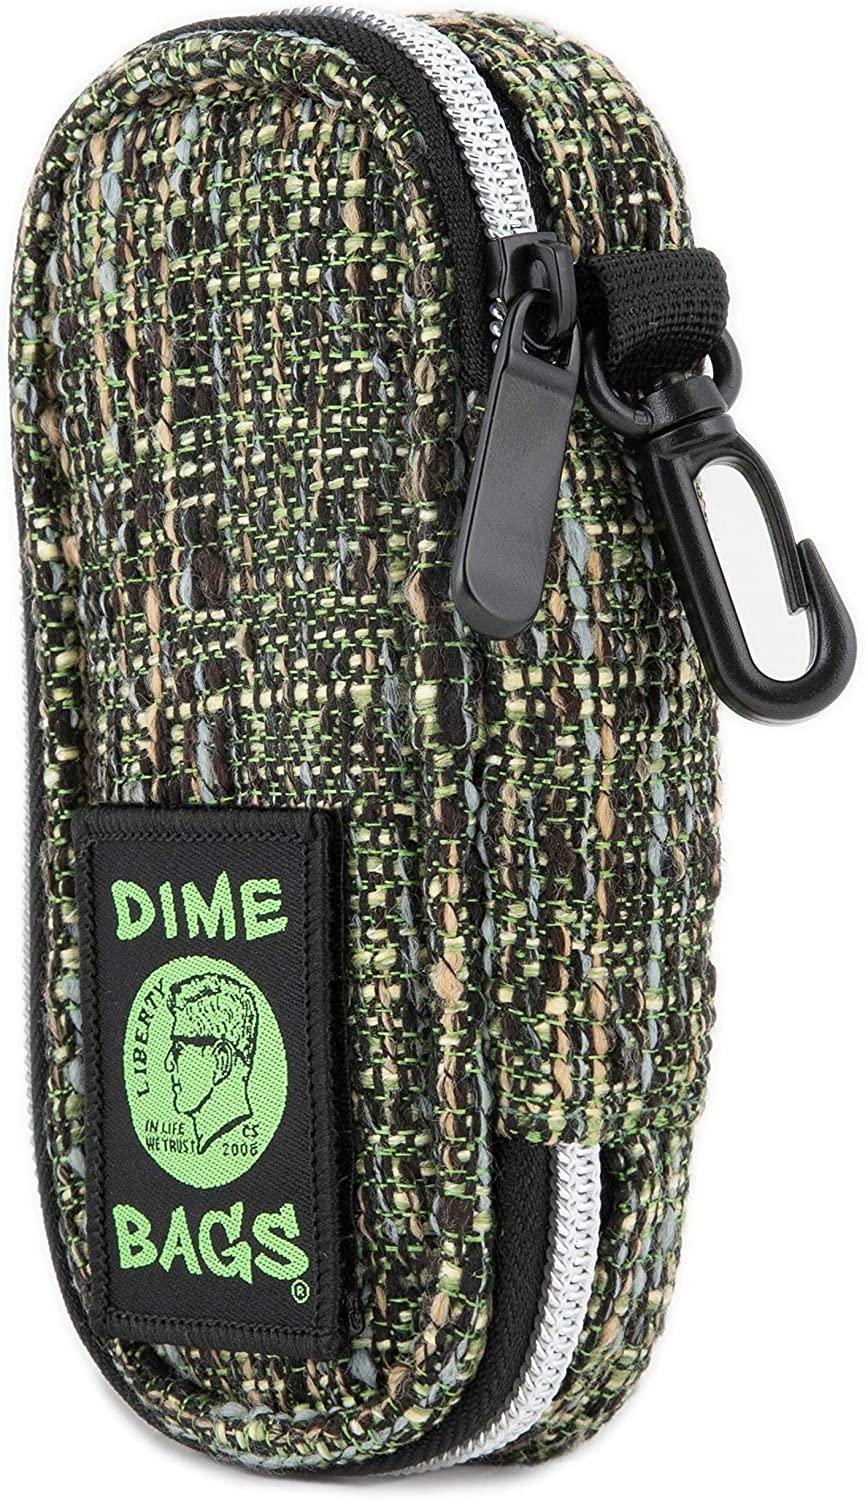 Dime Bags Pod Padded Travel Case with Key Chain Clip